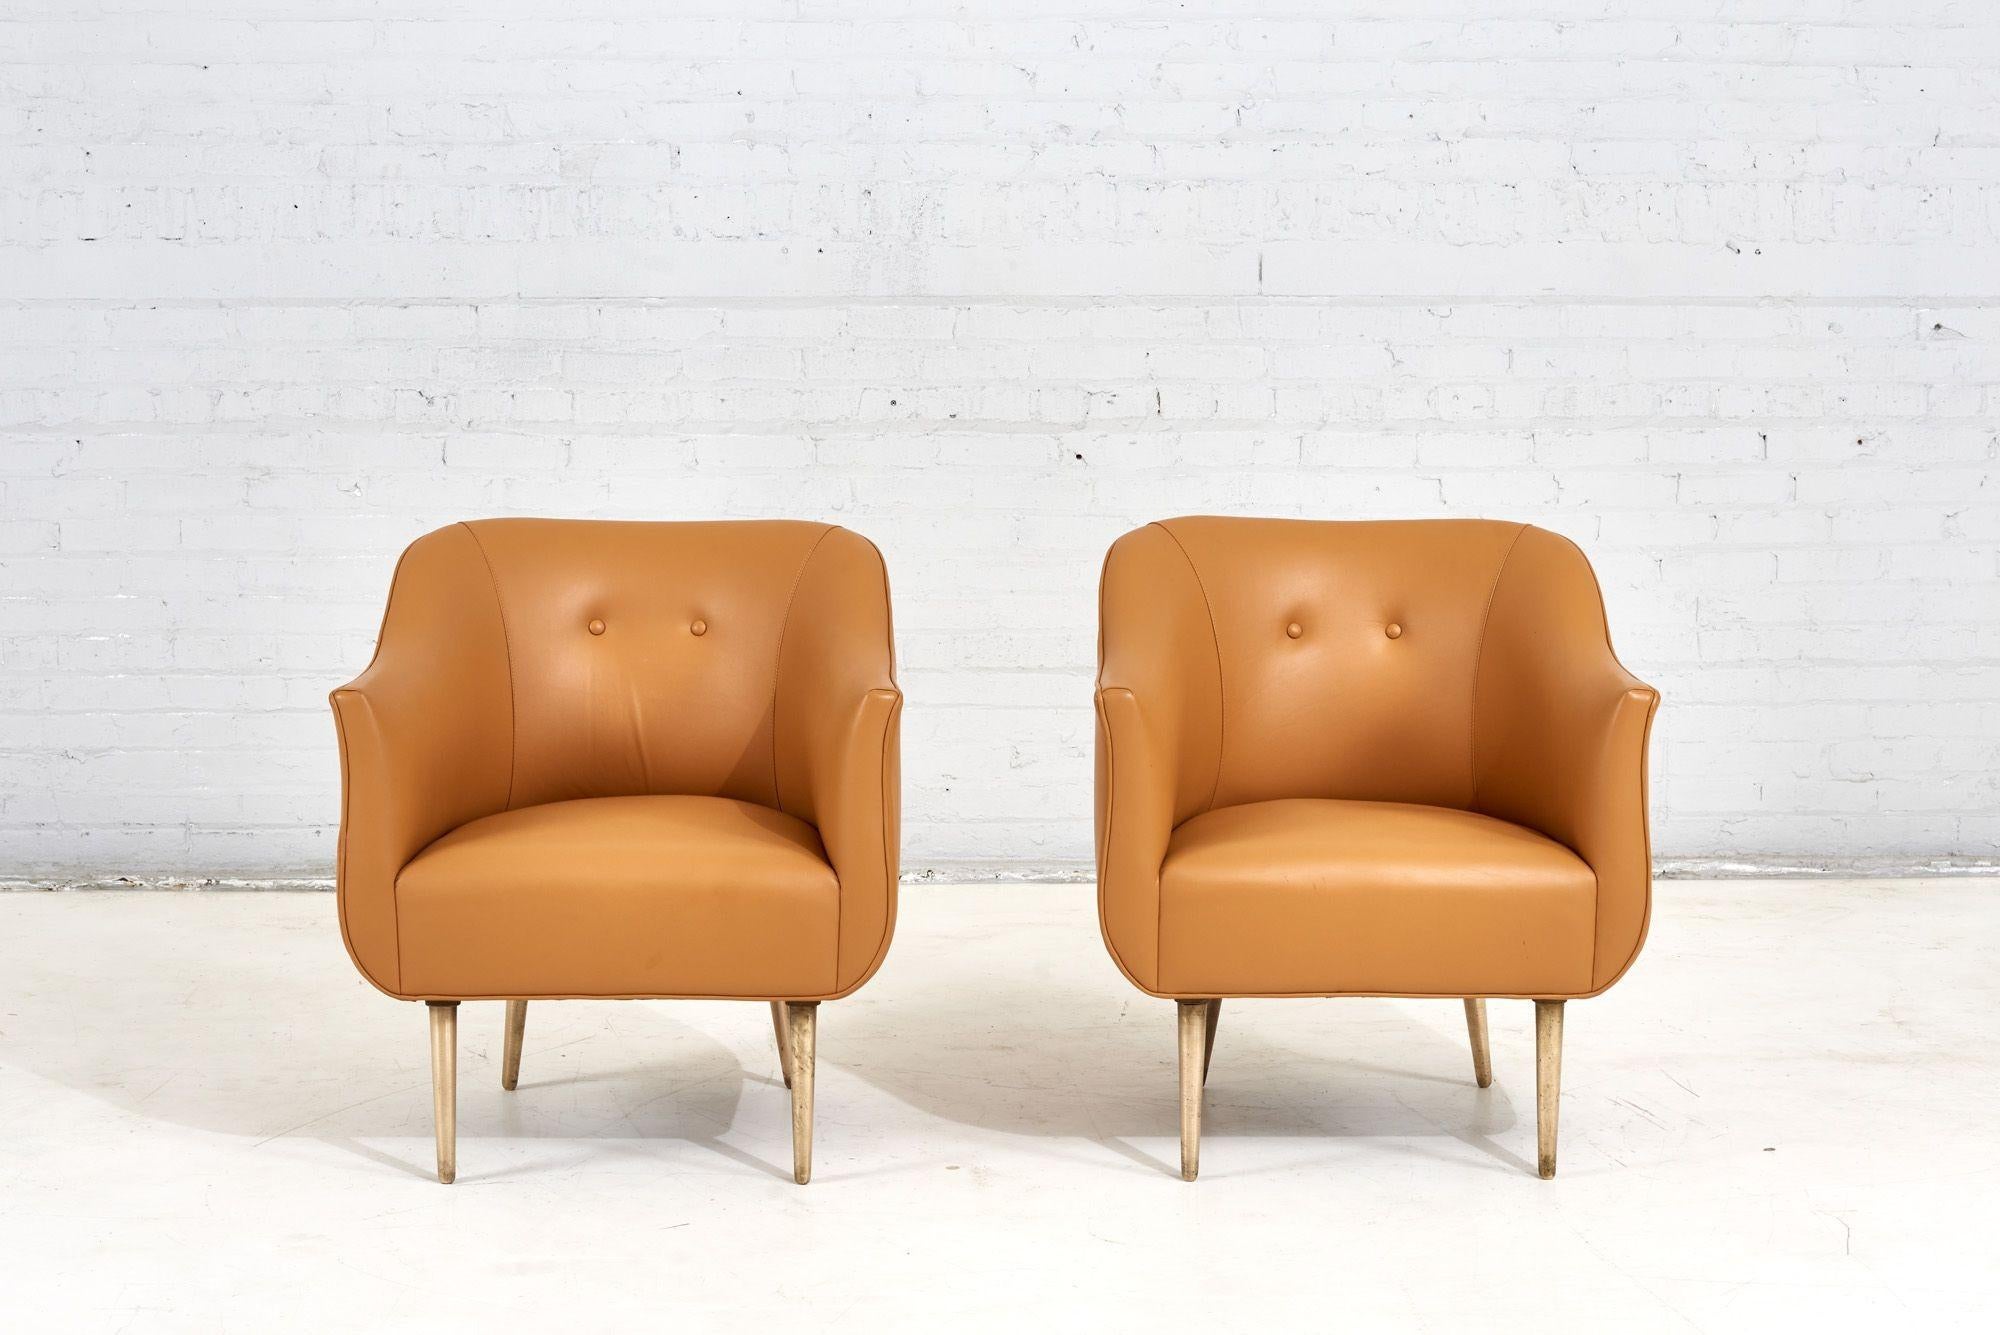 Dunbar Leather and Brass Lounge Chairs by Edward Wormley, 1960. Original leather.